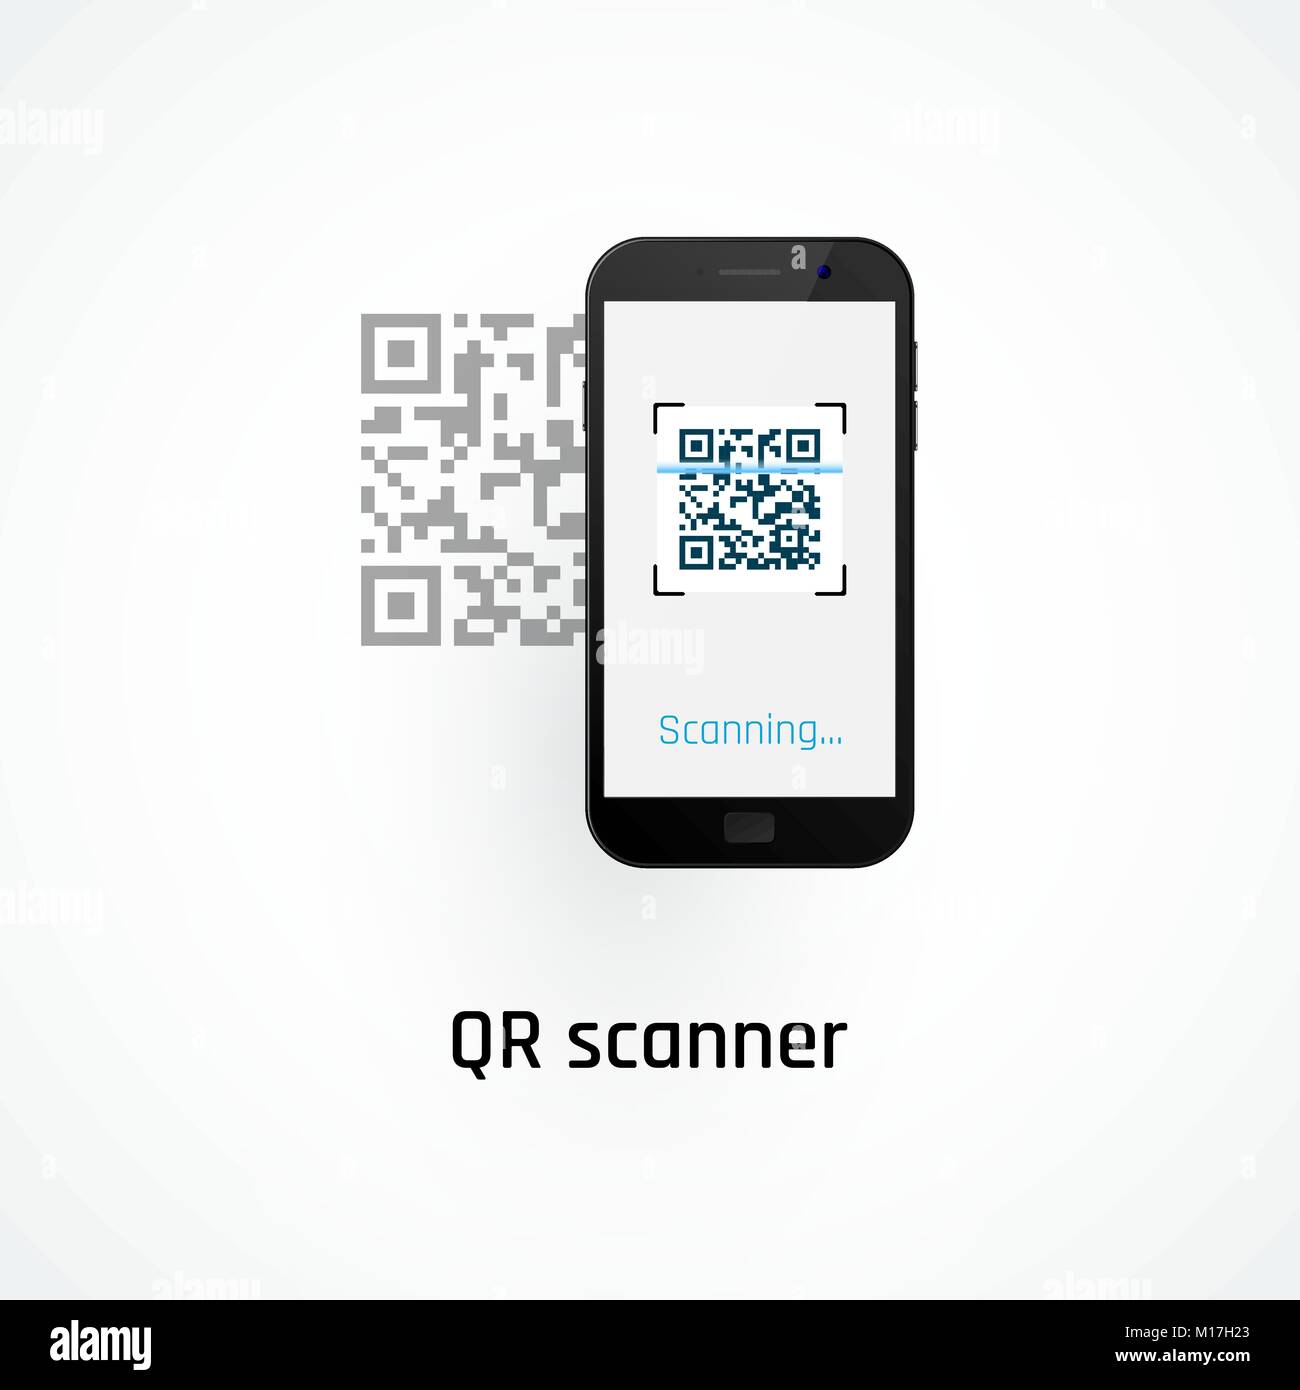 Mobile phone qr code scanning concept. Vector illustration isolated on white background Stock Vector